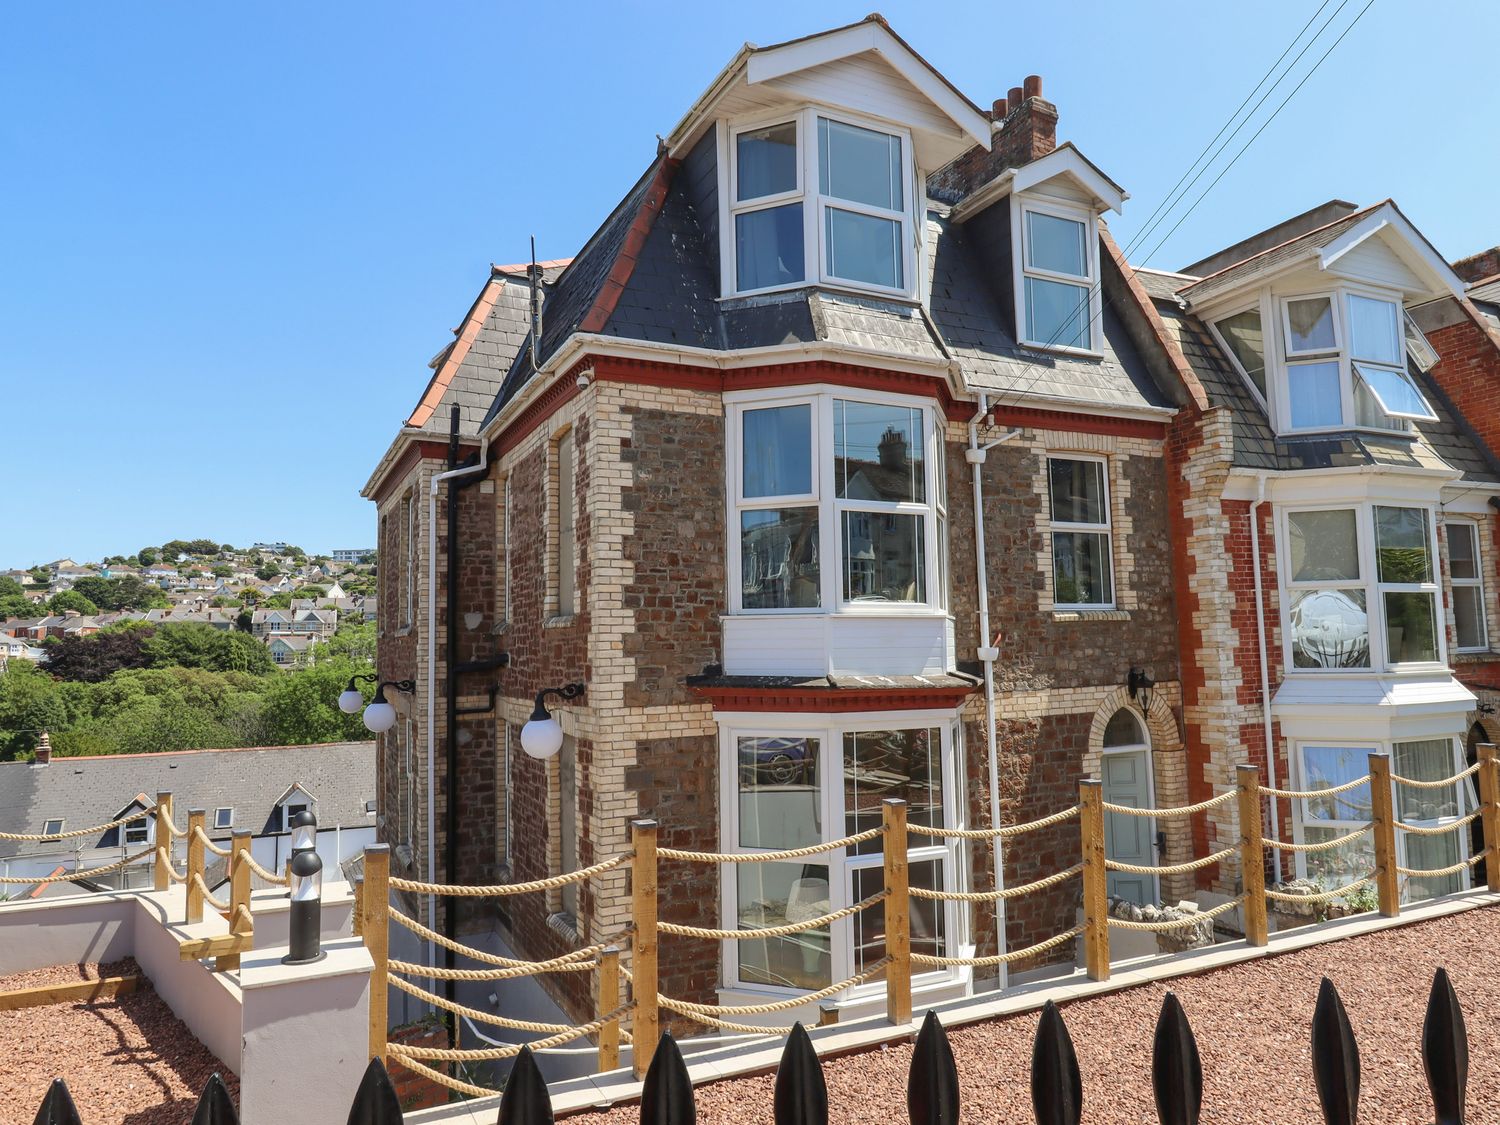 20 Station Road, is in Ilfracombe, Devon. Seven-bedroom home with games room and hot tub. Sea views.